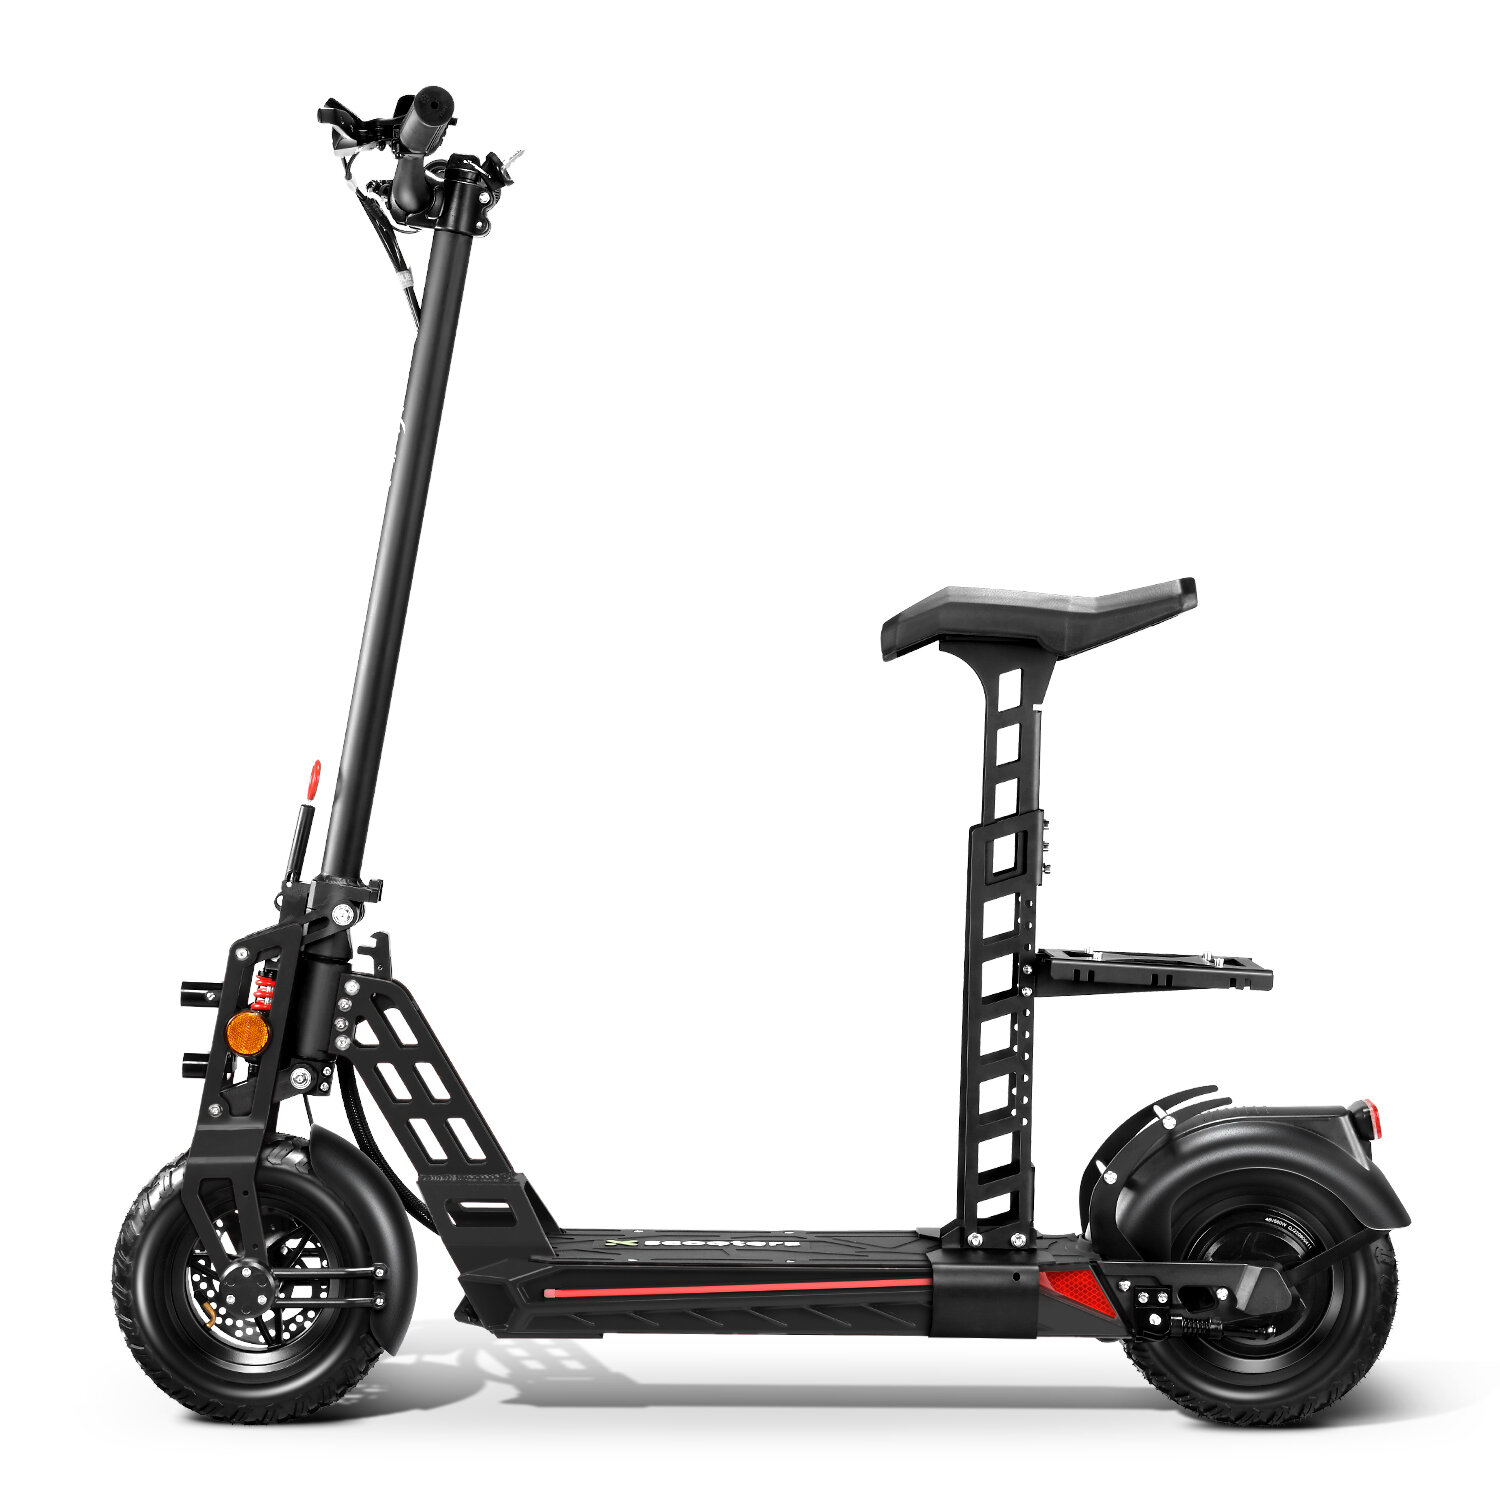 [UK Direct] Urbeffer GYL110-M6 48V 13AH 500W 11inch Folding Electric Scooter 30-35KM Max Mileage 80-120KG Max Load E-Scooter